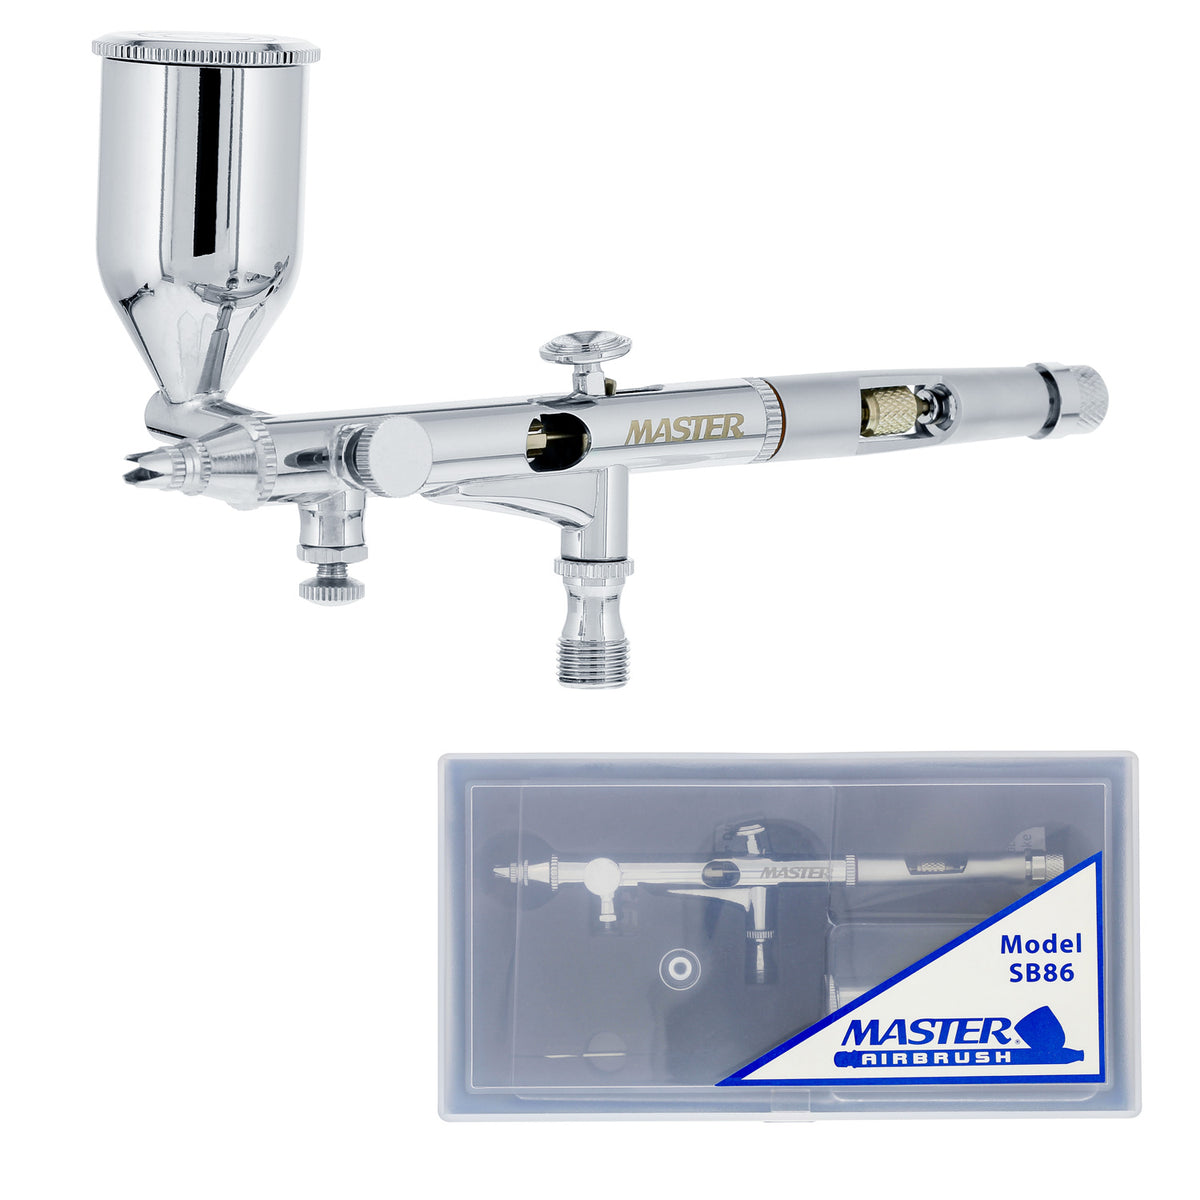 Global TCP — Fluid Kit, Tip, 0.2mm Cup Airbrush Side Gravity Dual-Action Feed Set